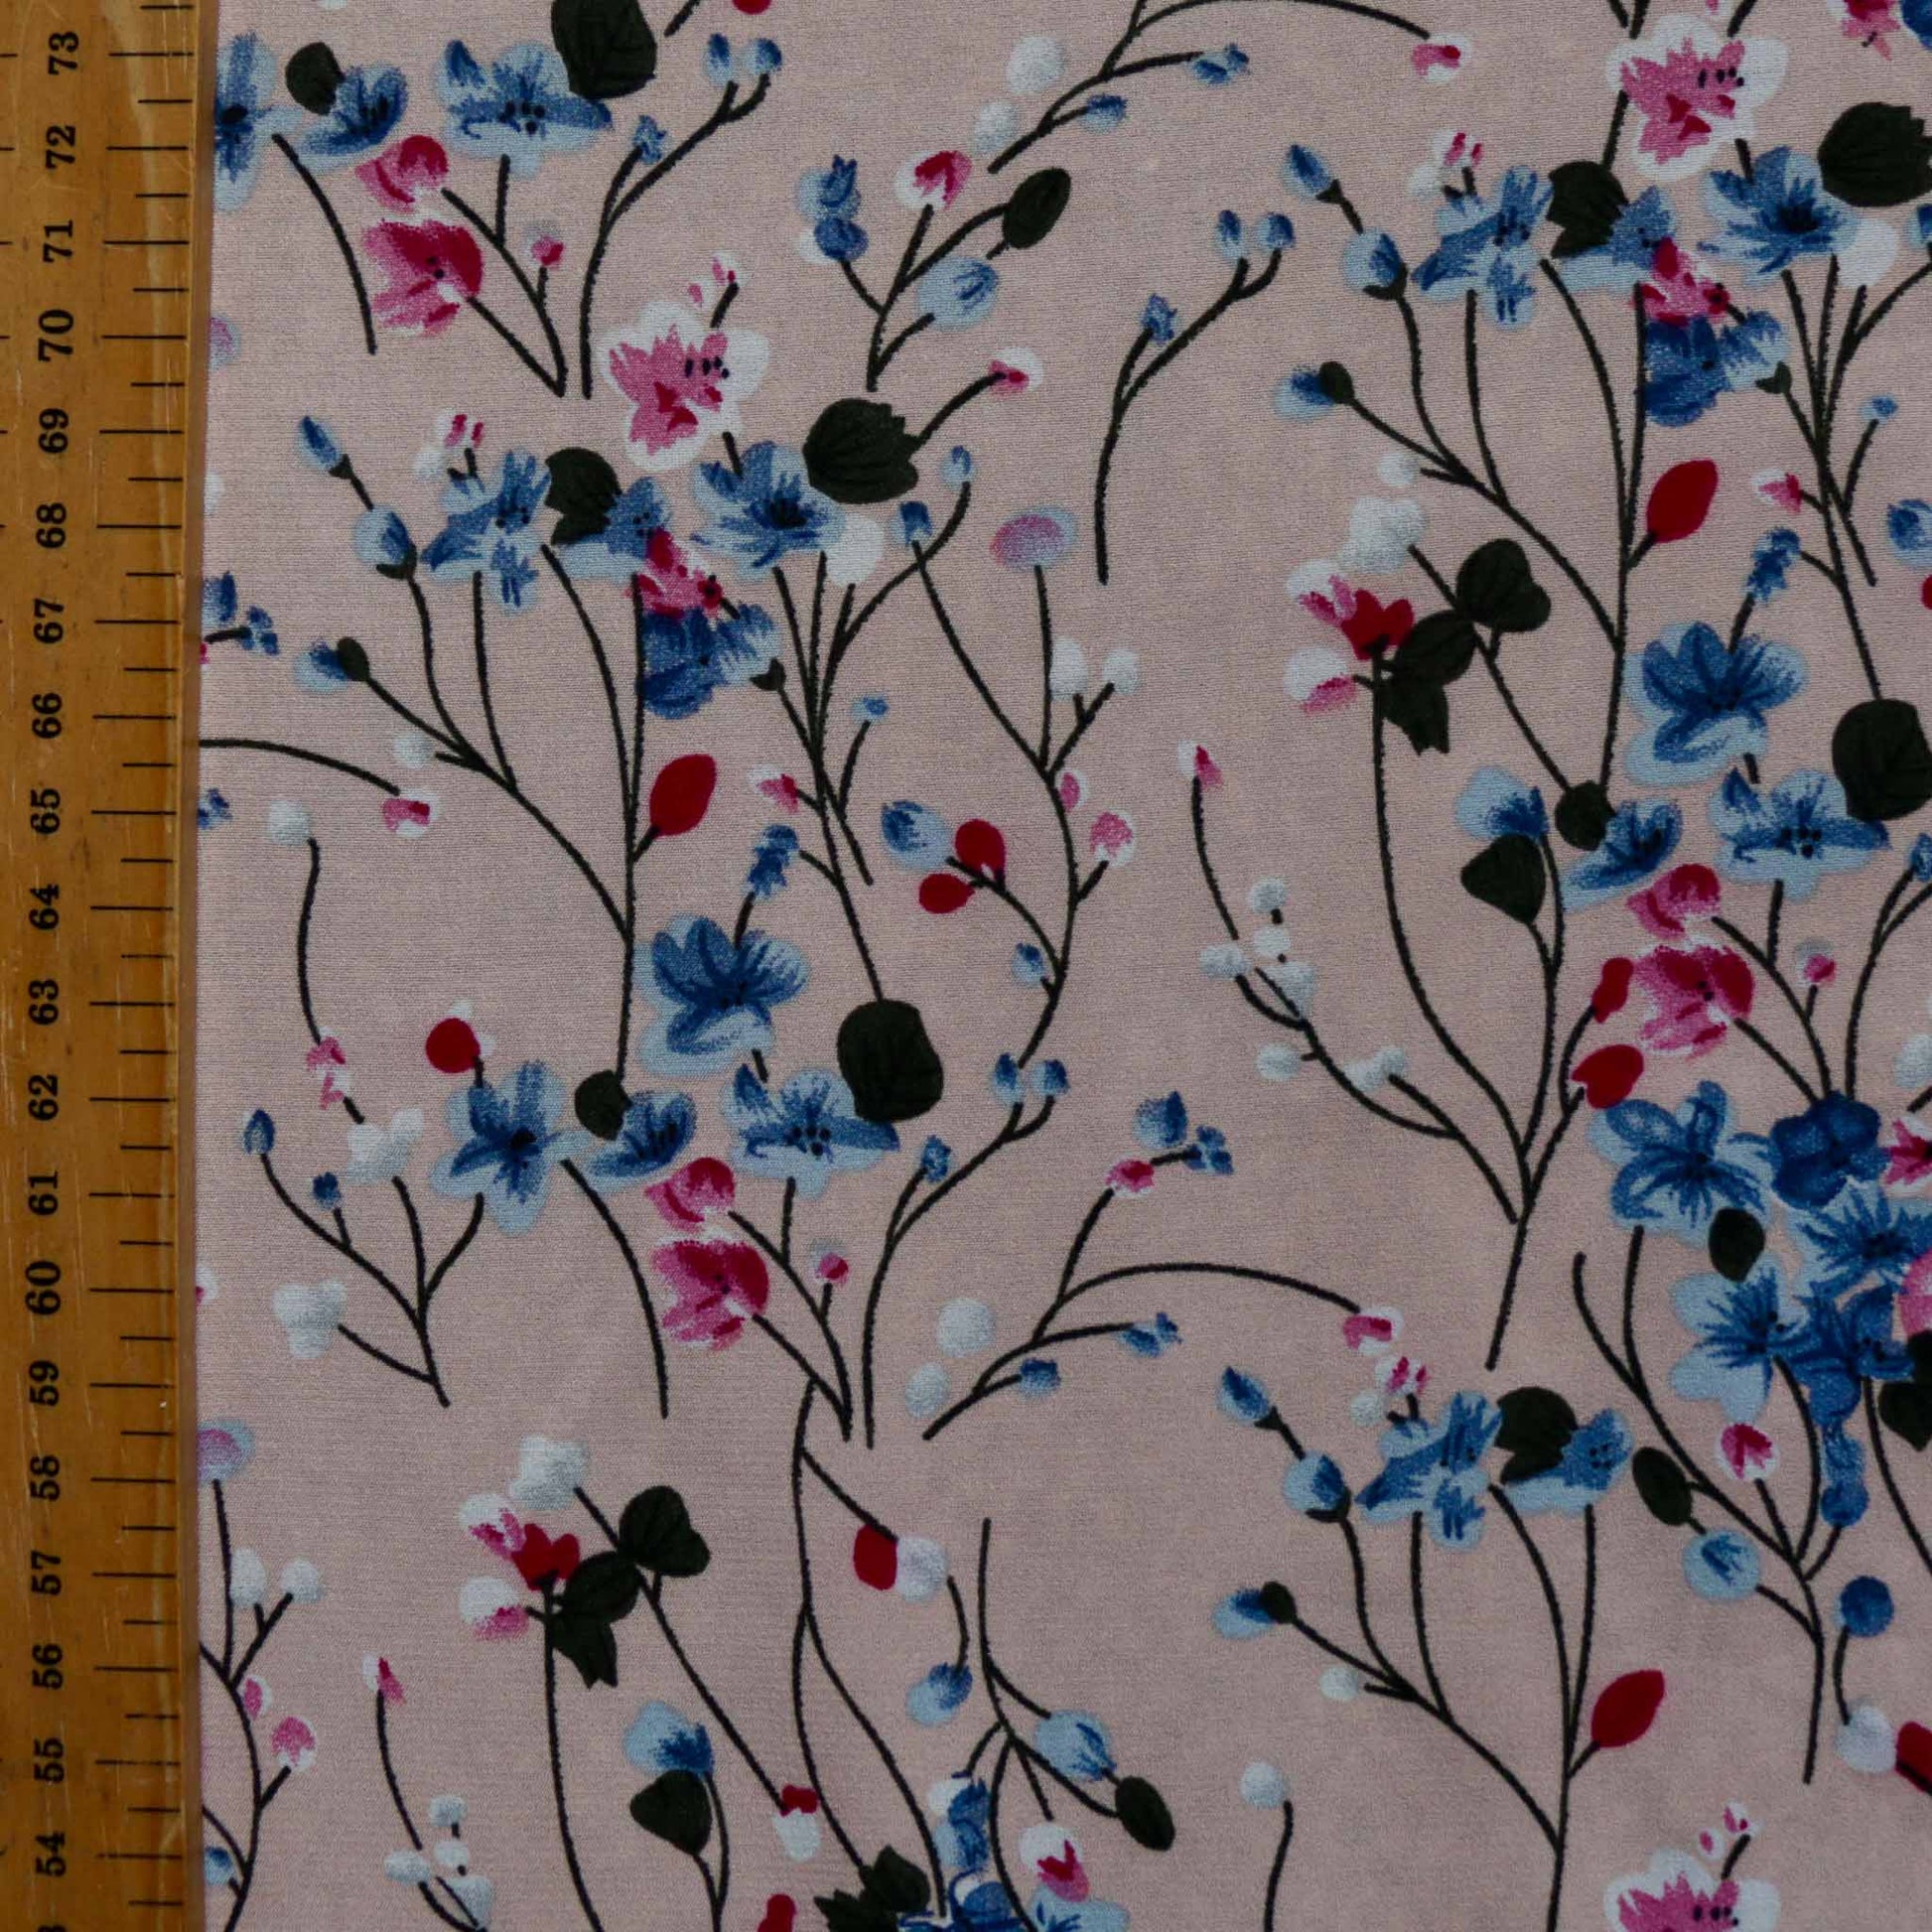 metre chiffon stretchy polyester dressmaking fabric in pink with blue and white floral flower print